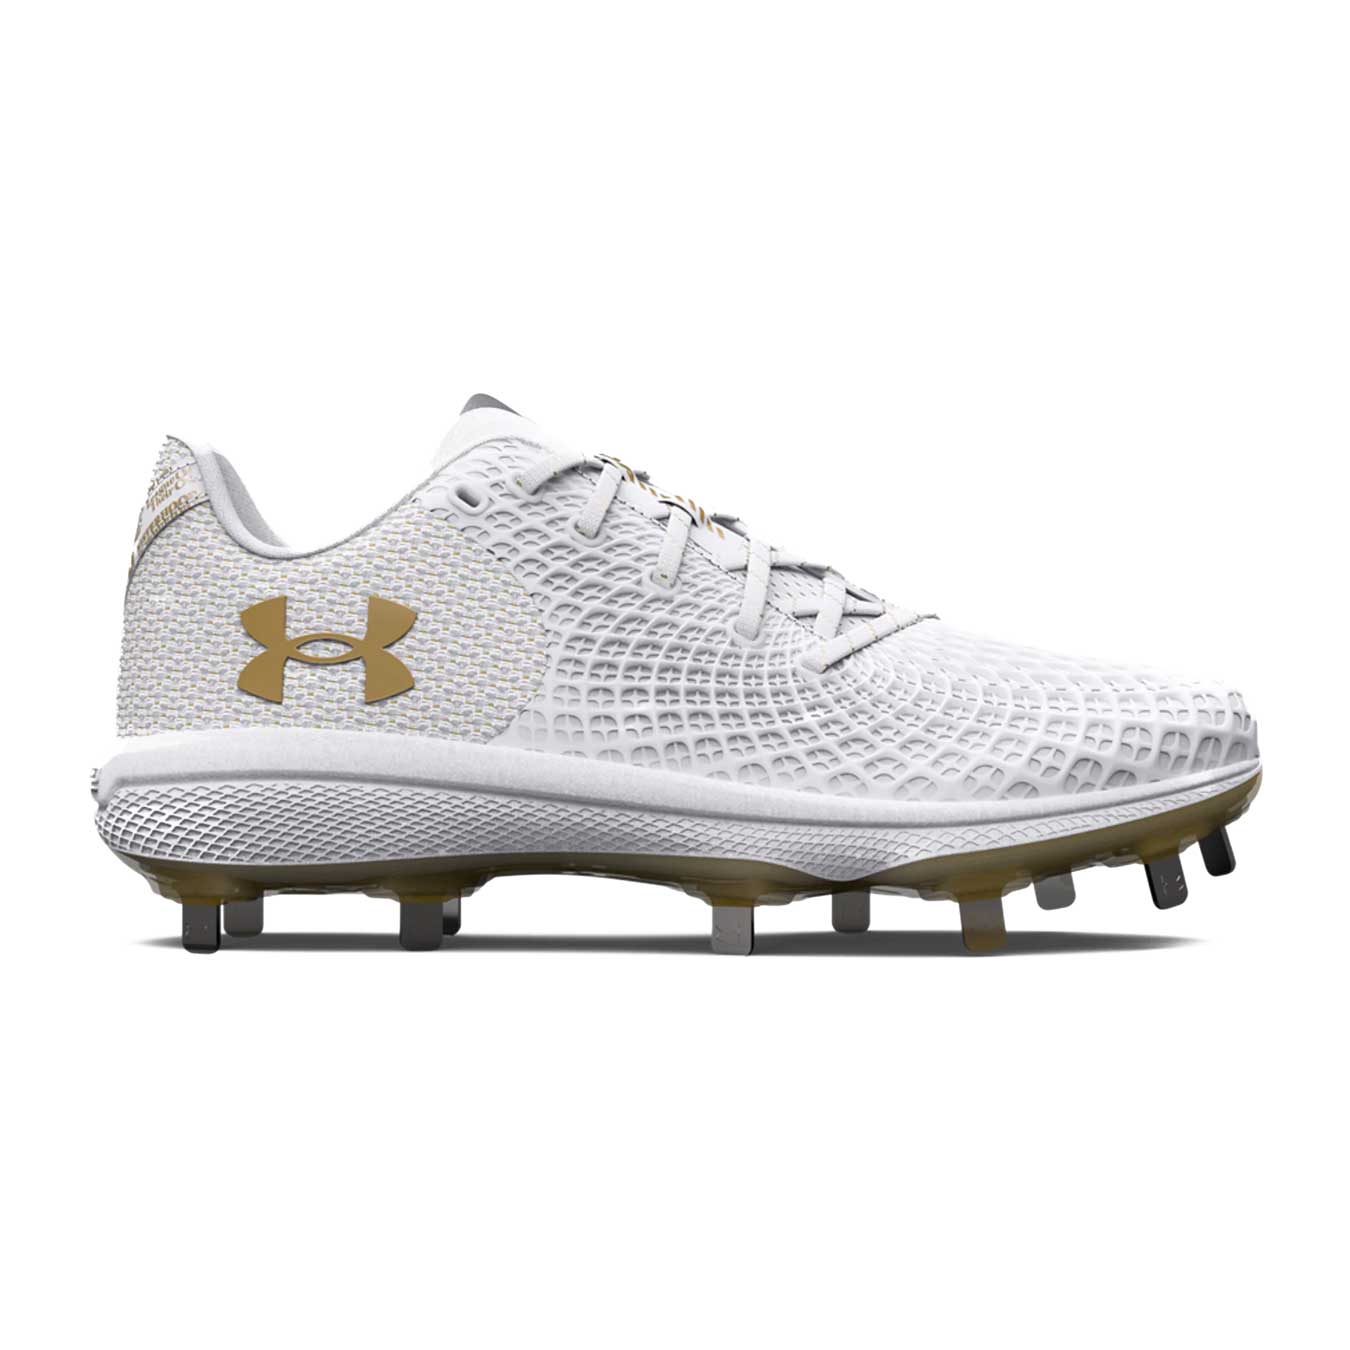 Under Armour Womens Glyde 2.0 Metal